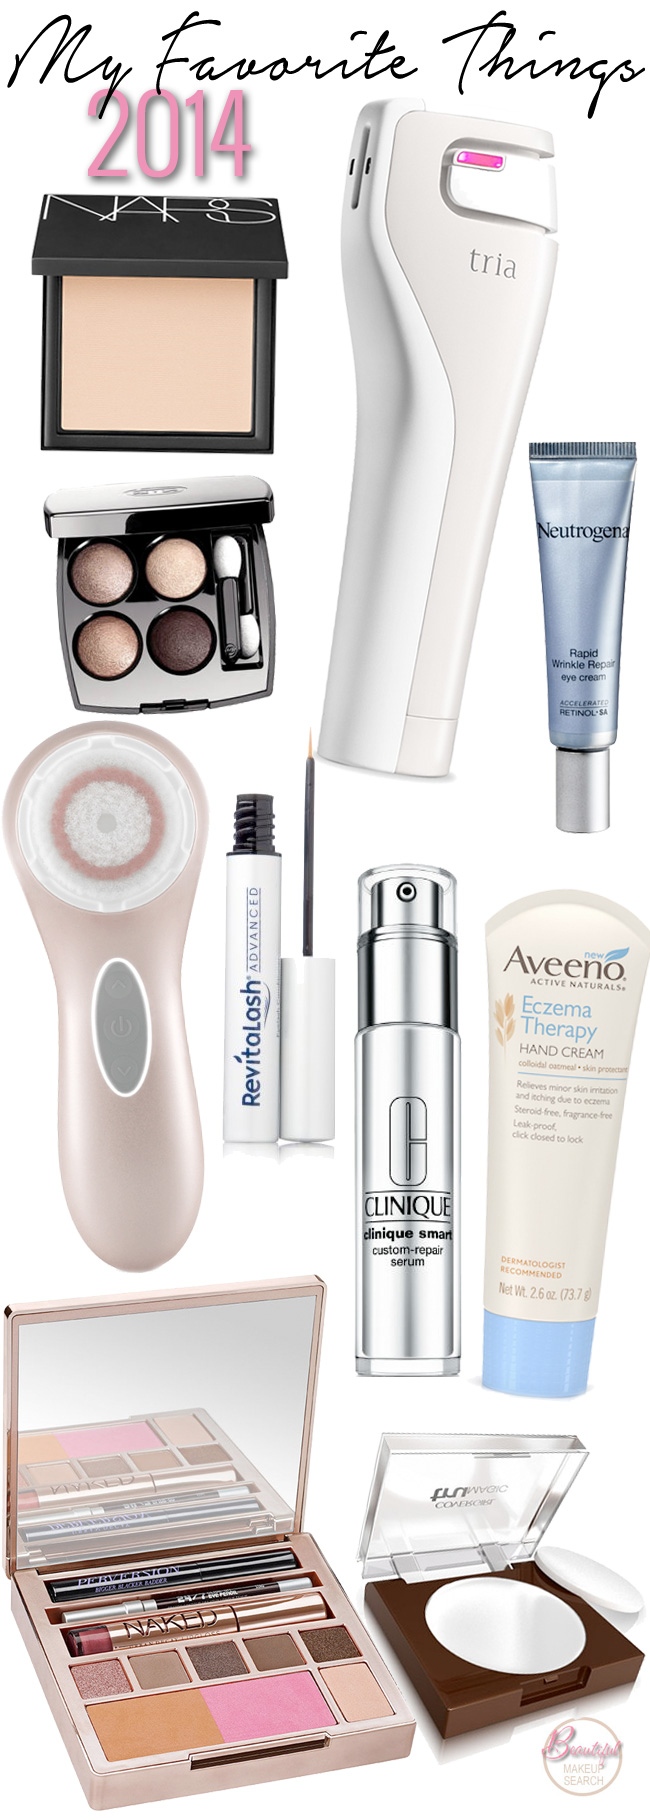 Top 10 Best Beauty Items of 2014